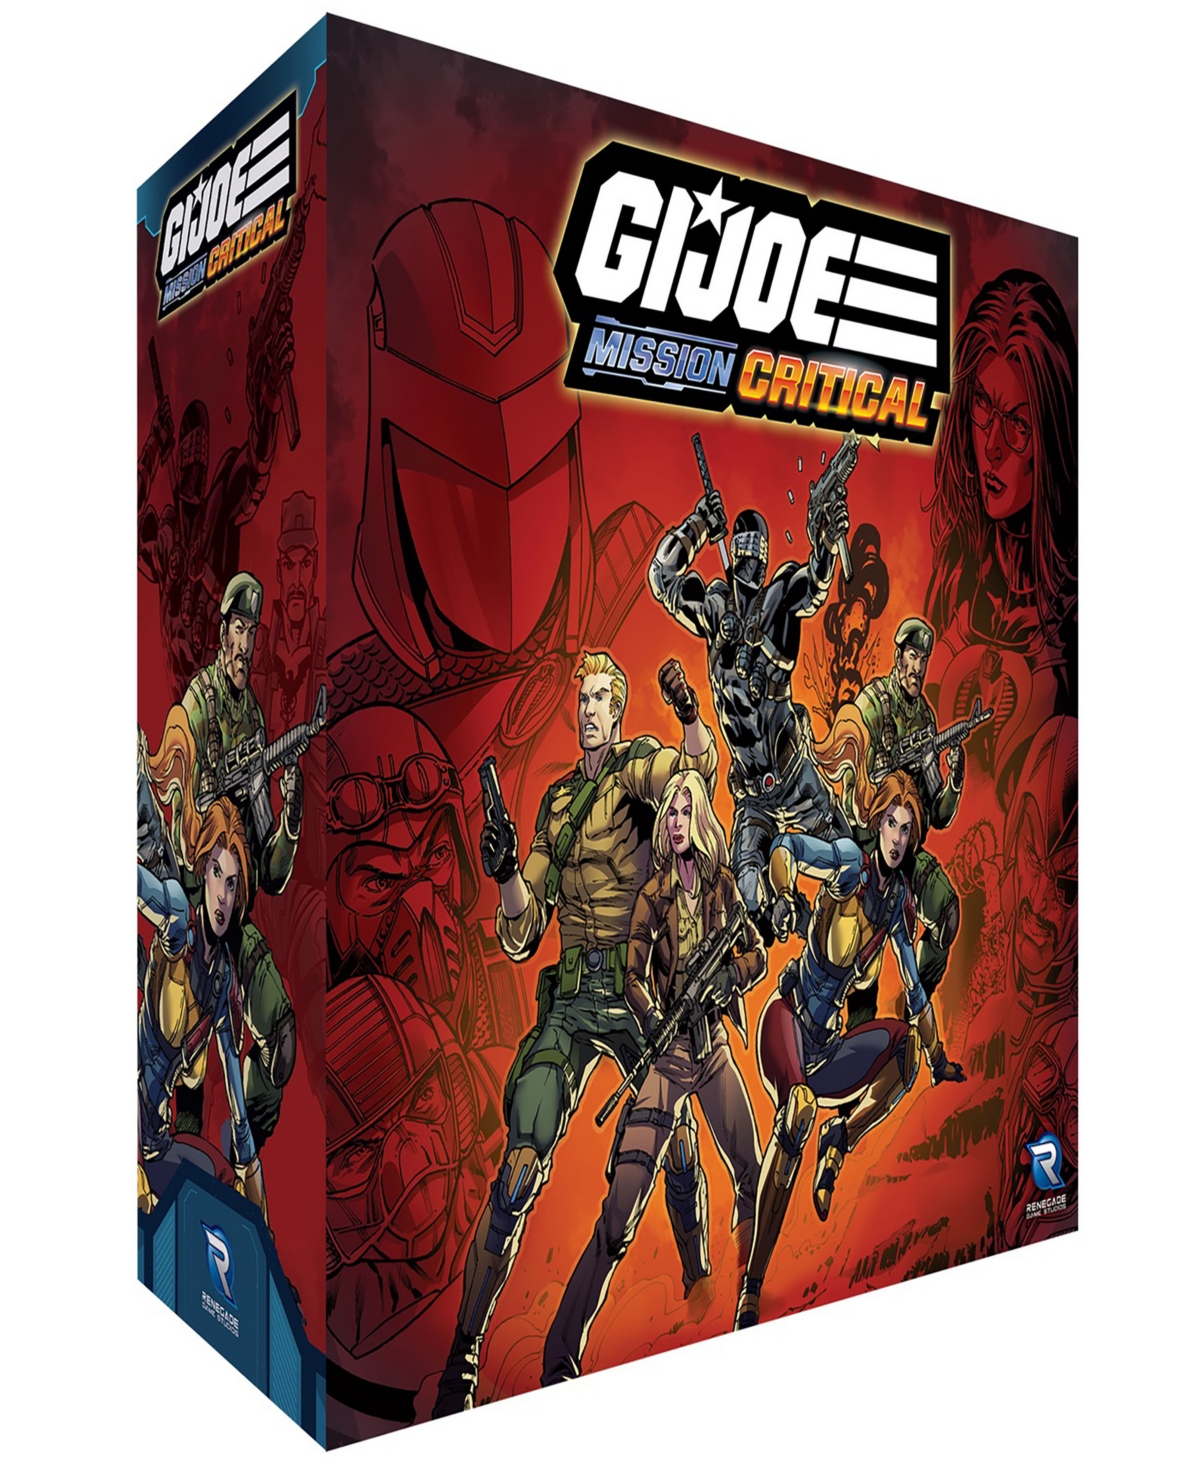 Renegade Game Studios G.i. Joe Mission Critical Core Box, Cooperative Board Game, Role Playing Game, 50-70 Minute Playing In Multi